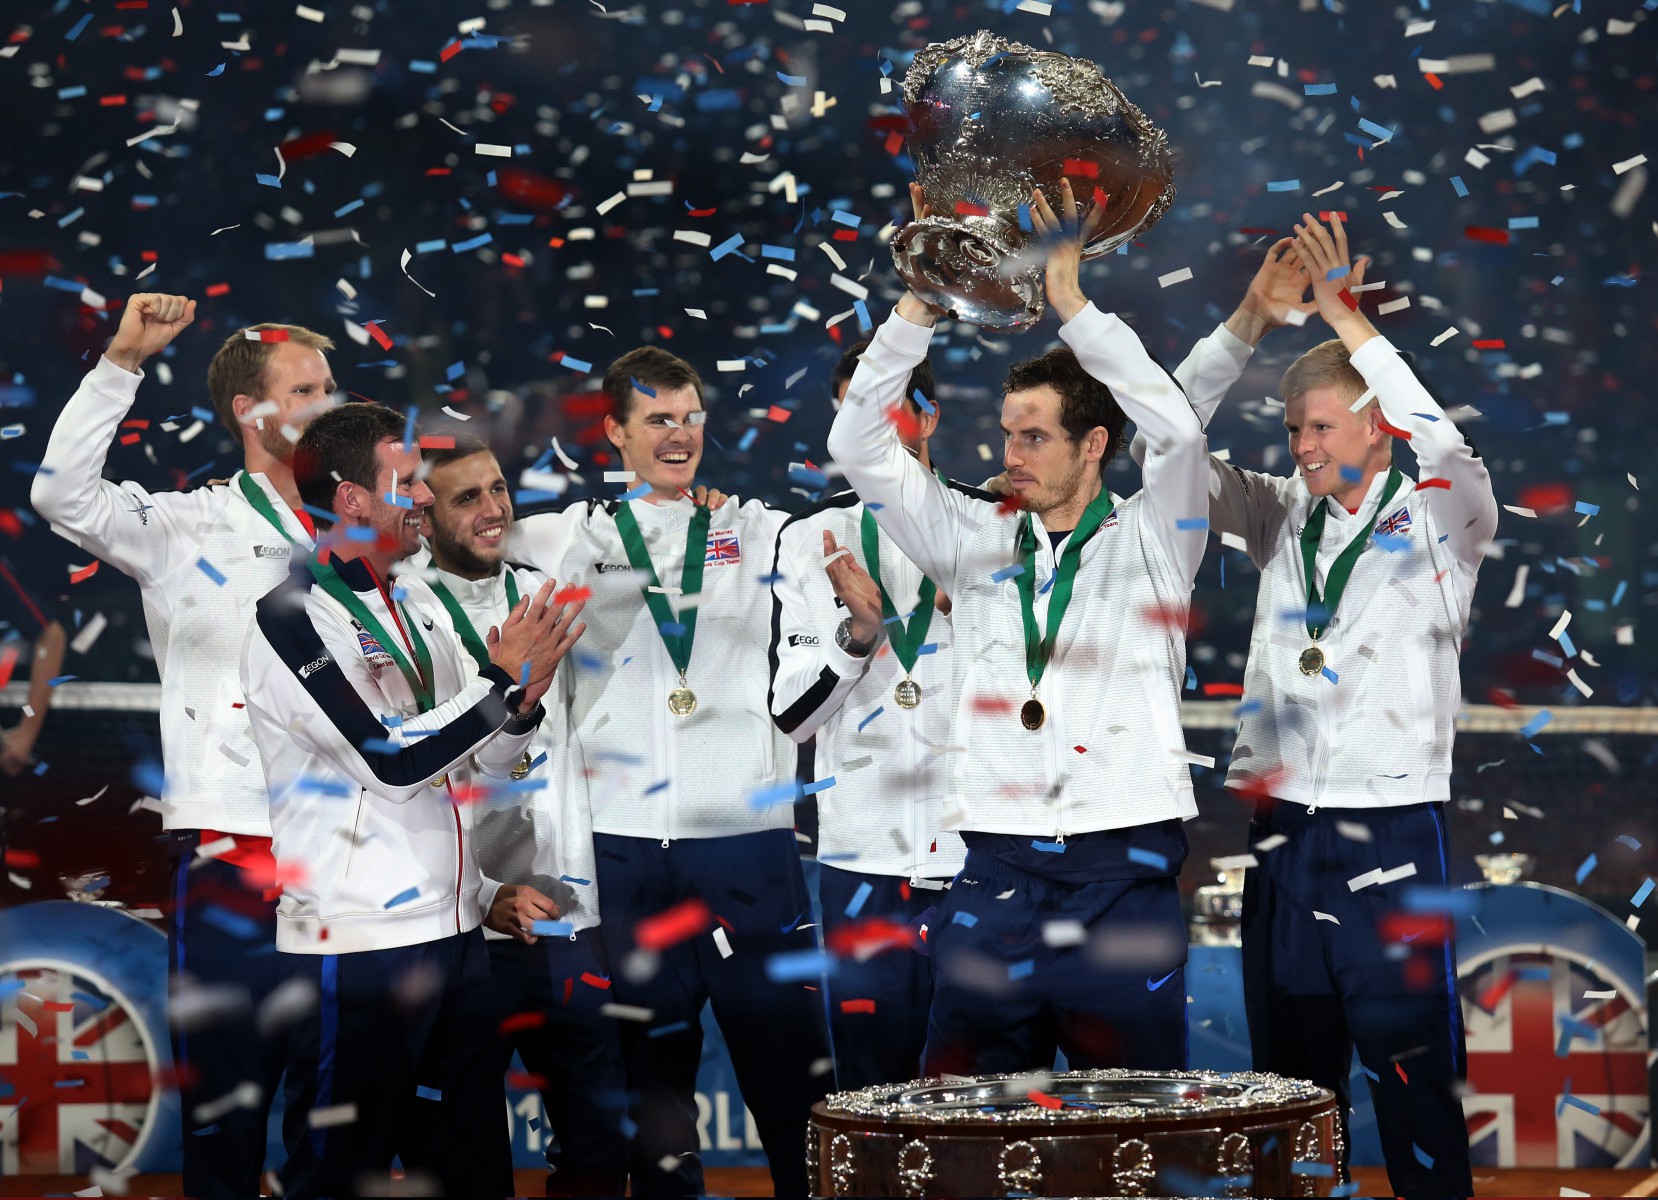 , Davis Cup: Date, time, live stream, TV channel, teams and schedule for the Finals